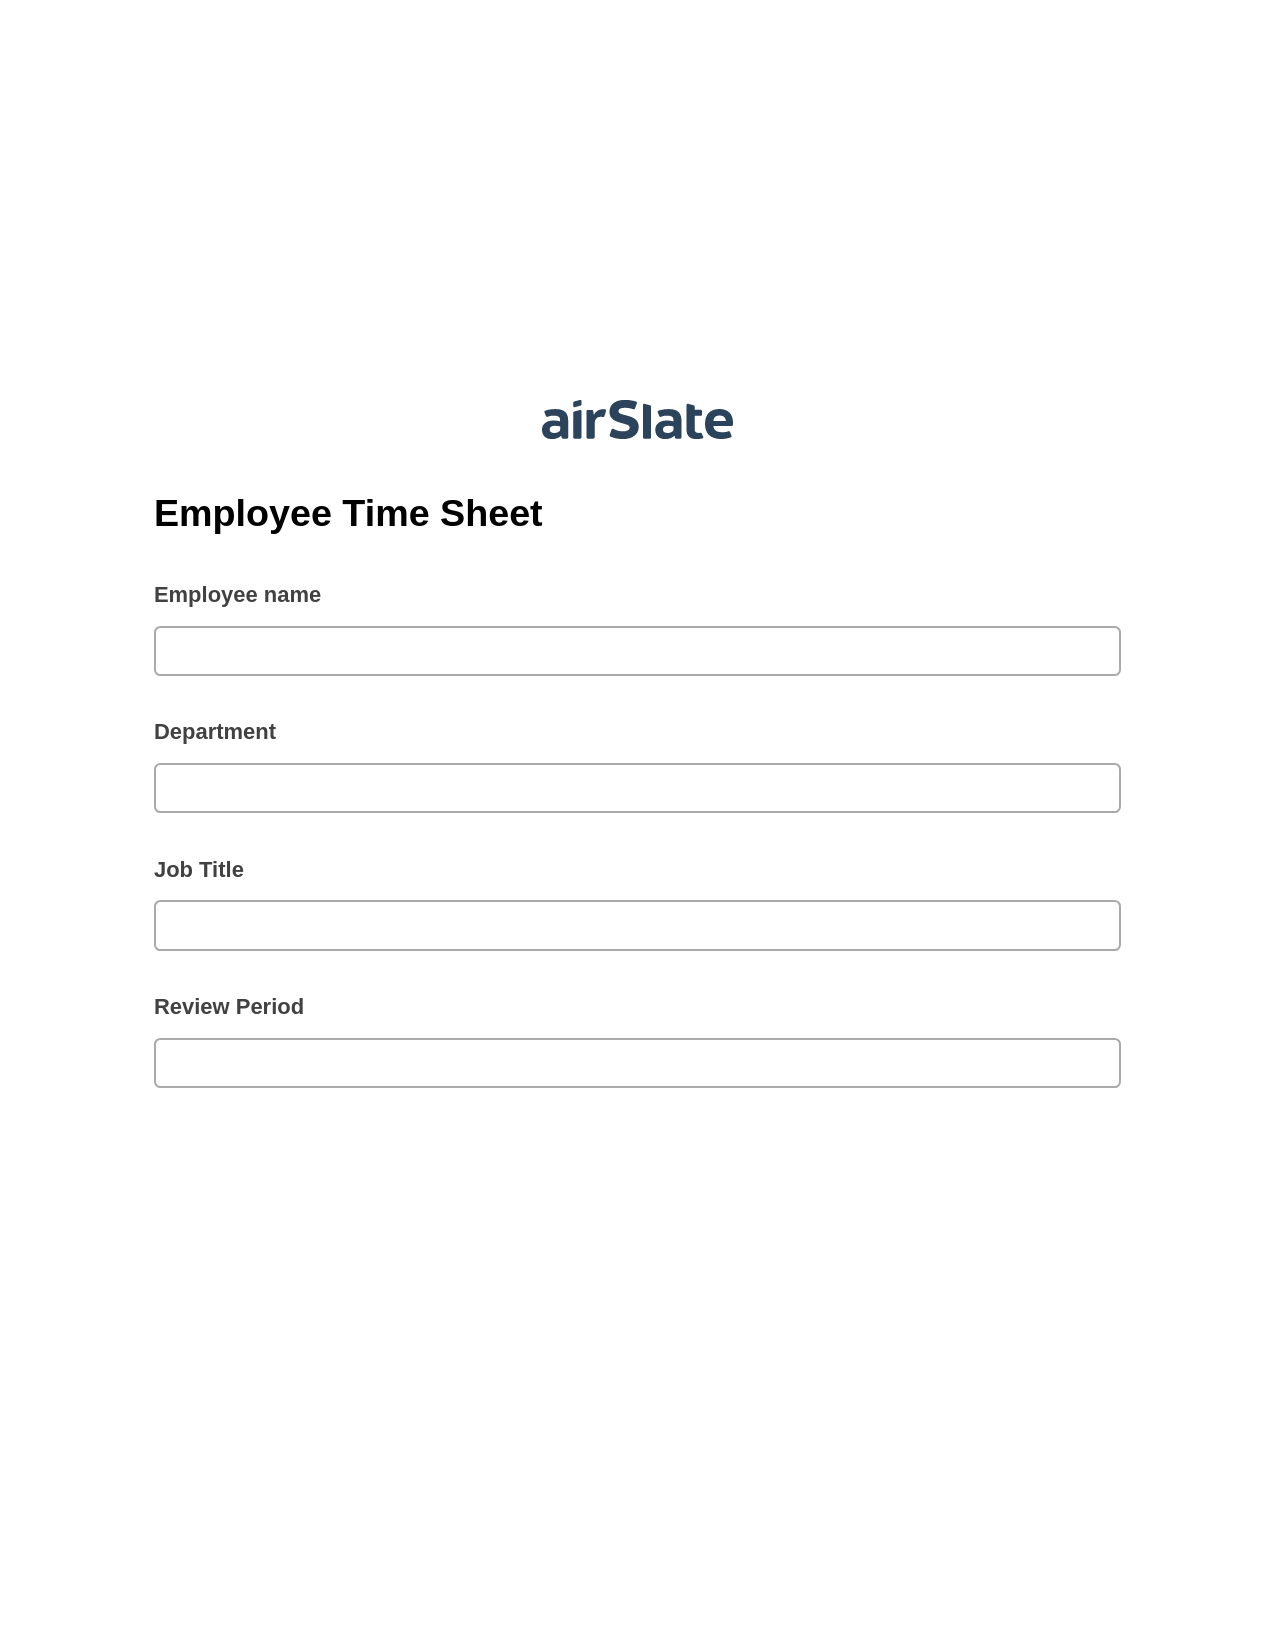 Multirole Employee Time Sheet Pre-fill from Excel Spreadsheet Bot, Create slate addon, Export to Excel 365 Bot